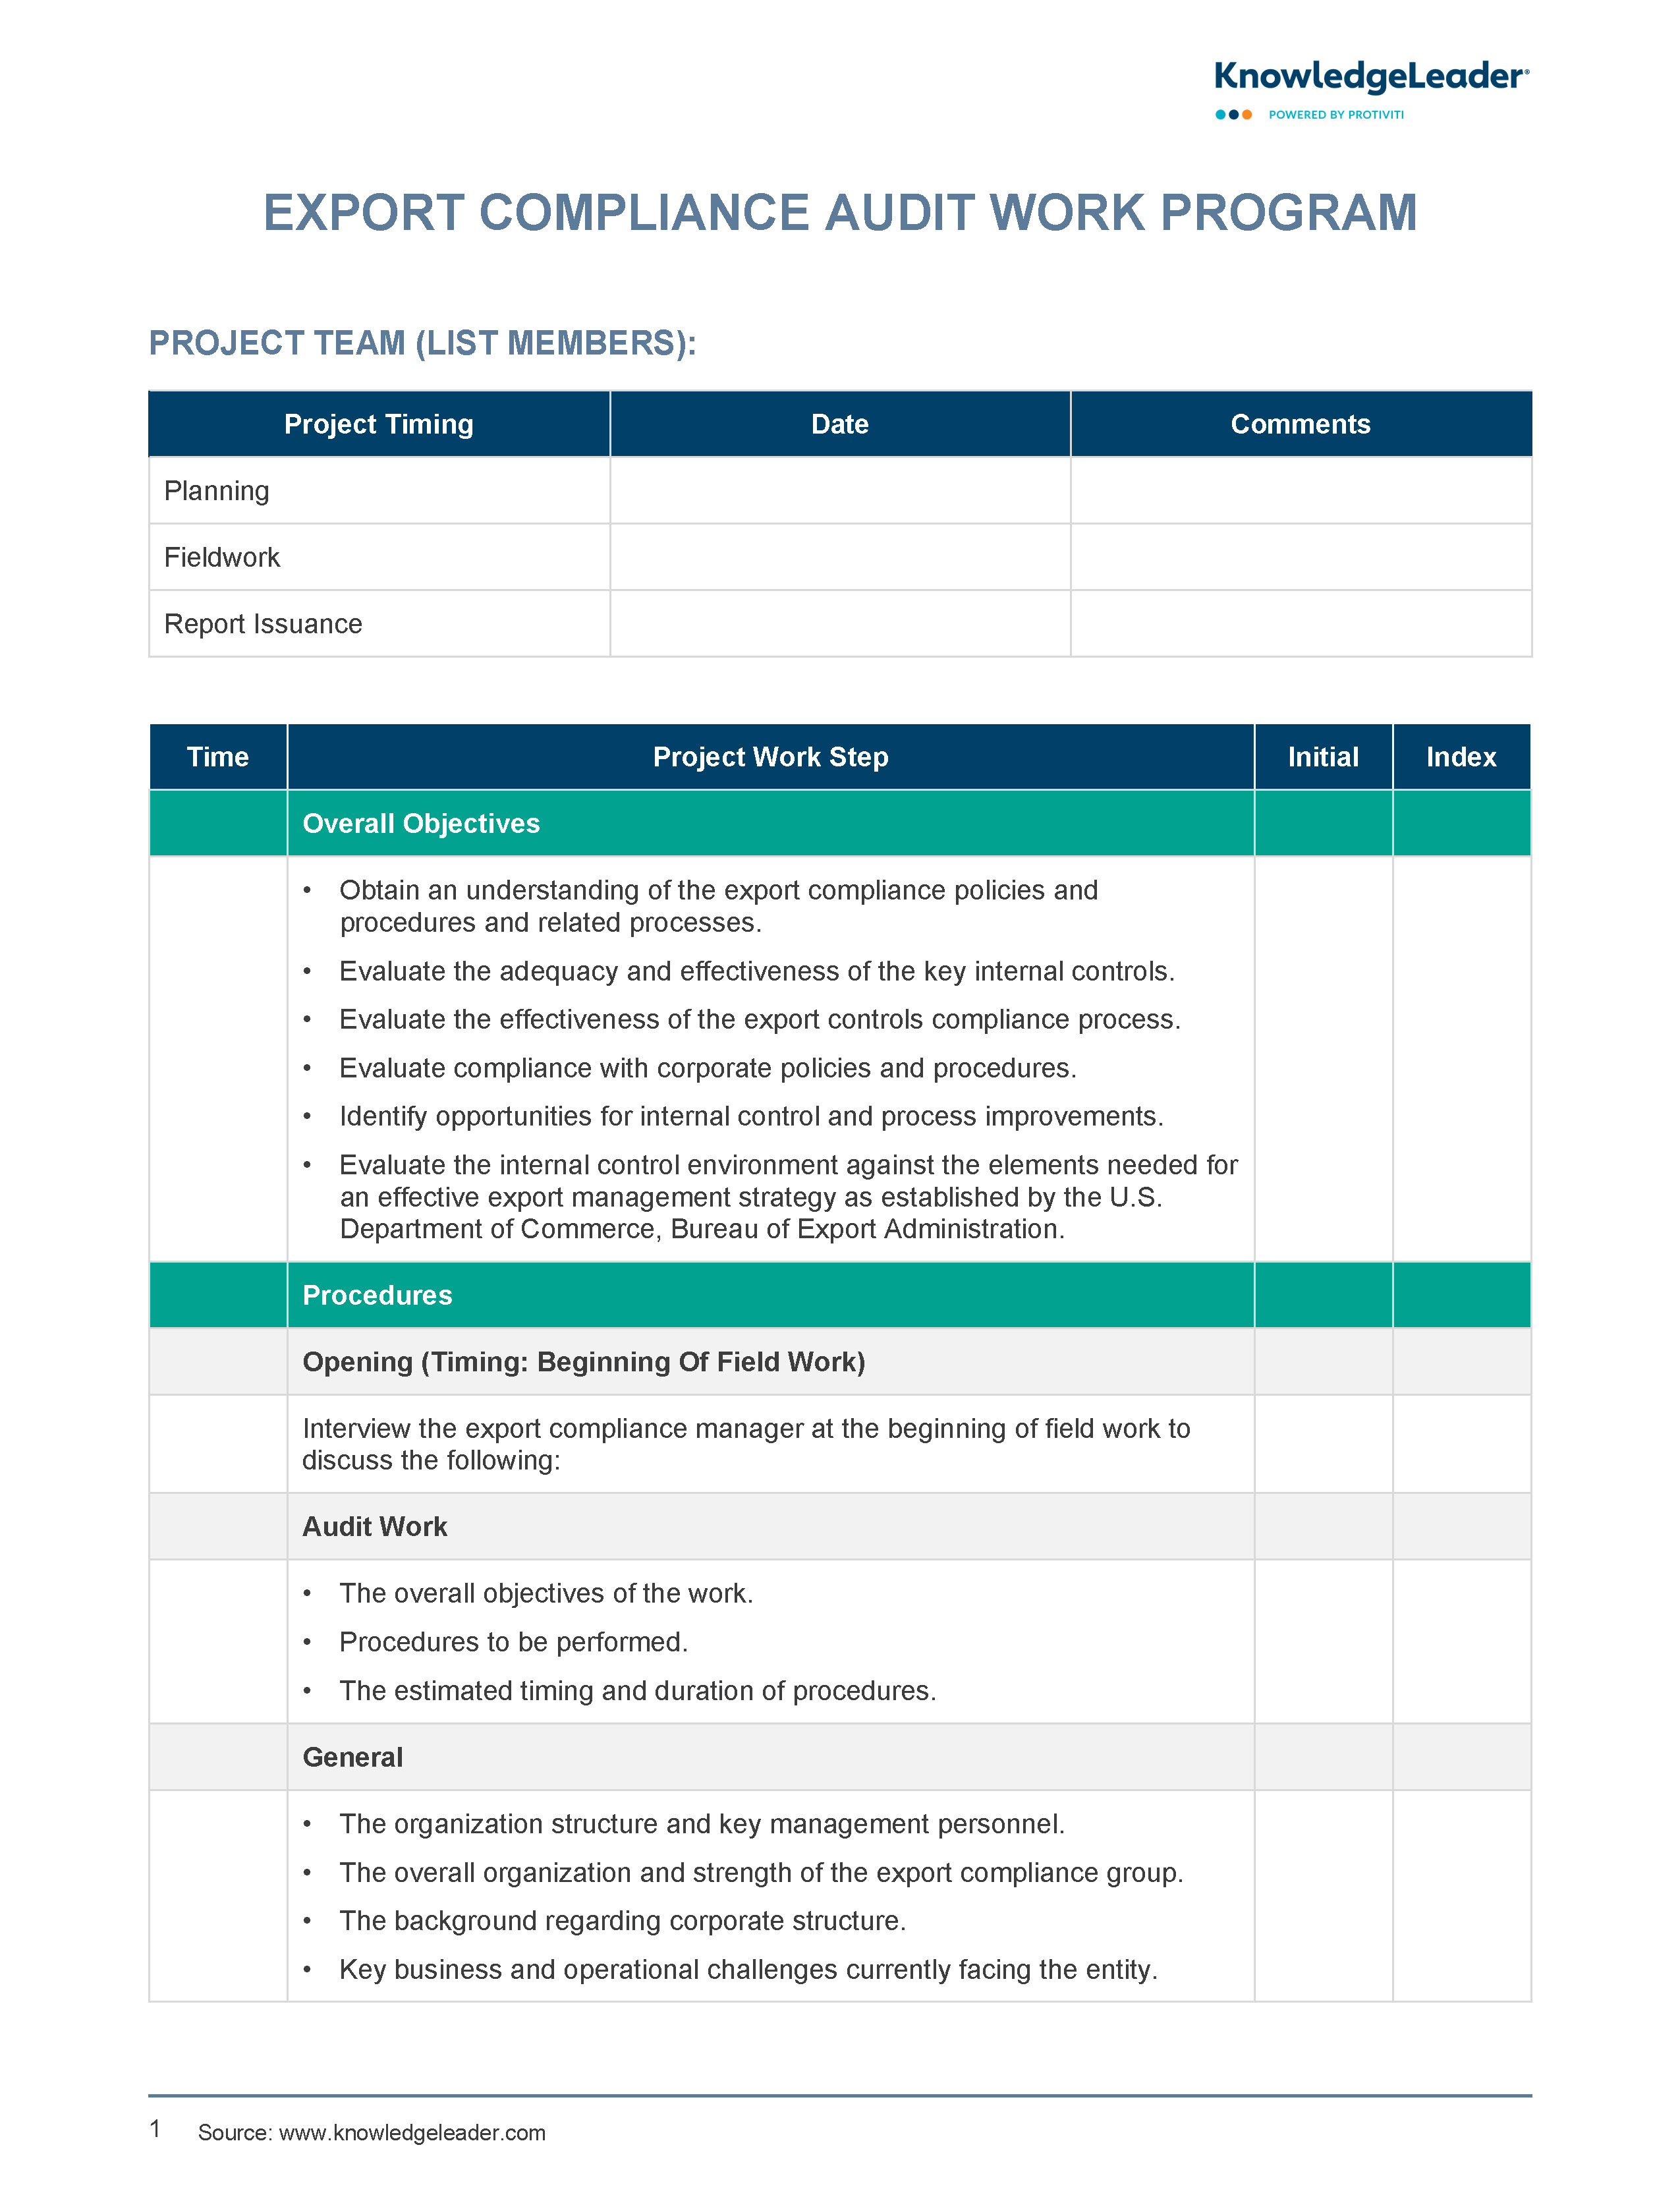 Screenshot of the first page of Export Compliance Audit Work Program